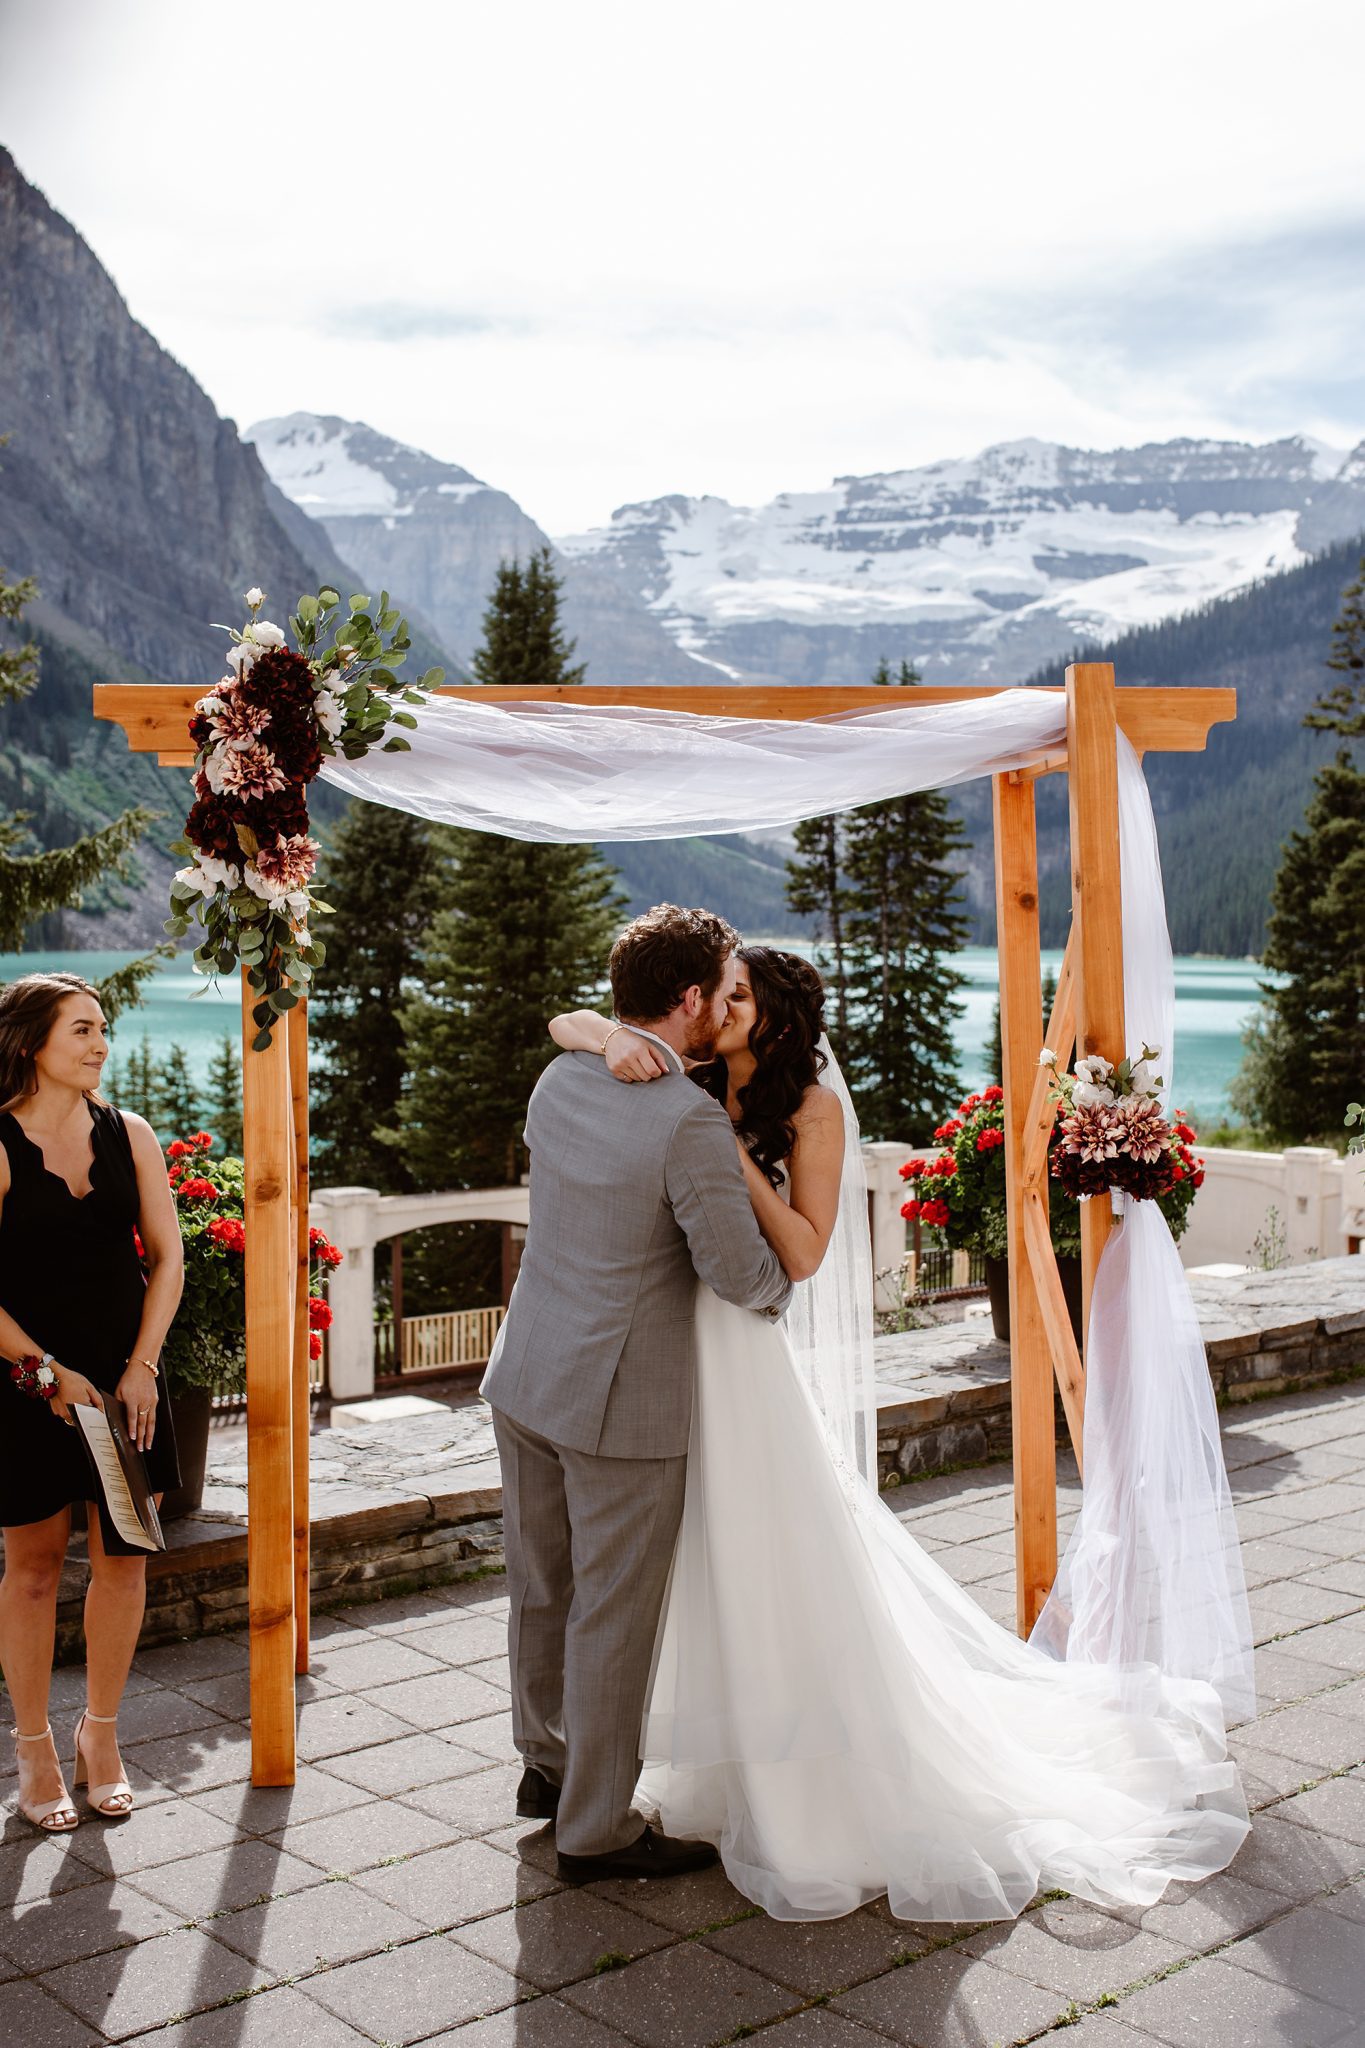 This Couple Ended up Loving Their Downsized Wedding at Fairmont Lake Louise - wedding ceremony, covid wedding, rocky mountains